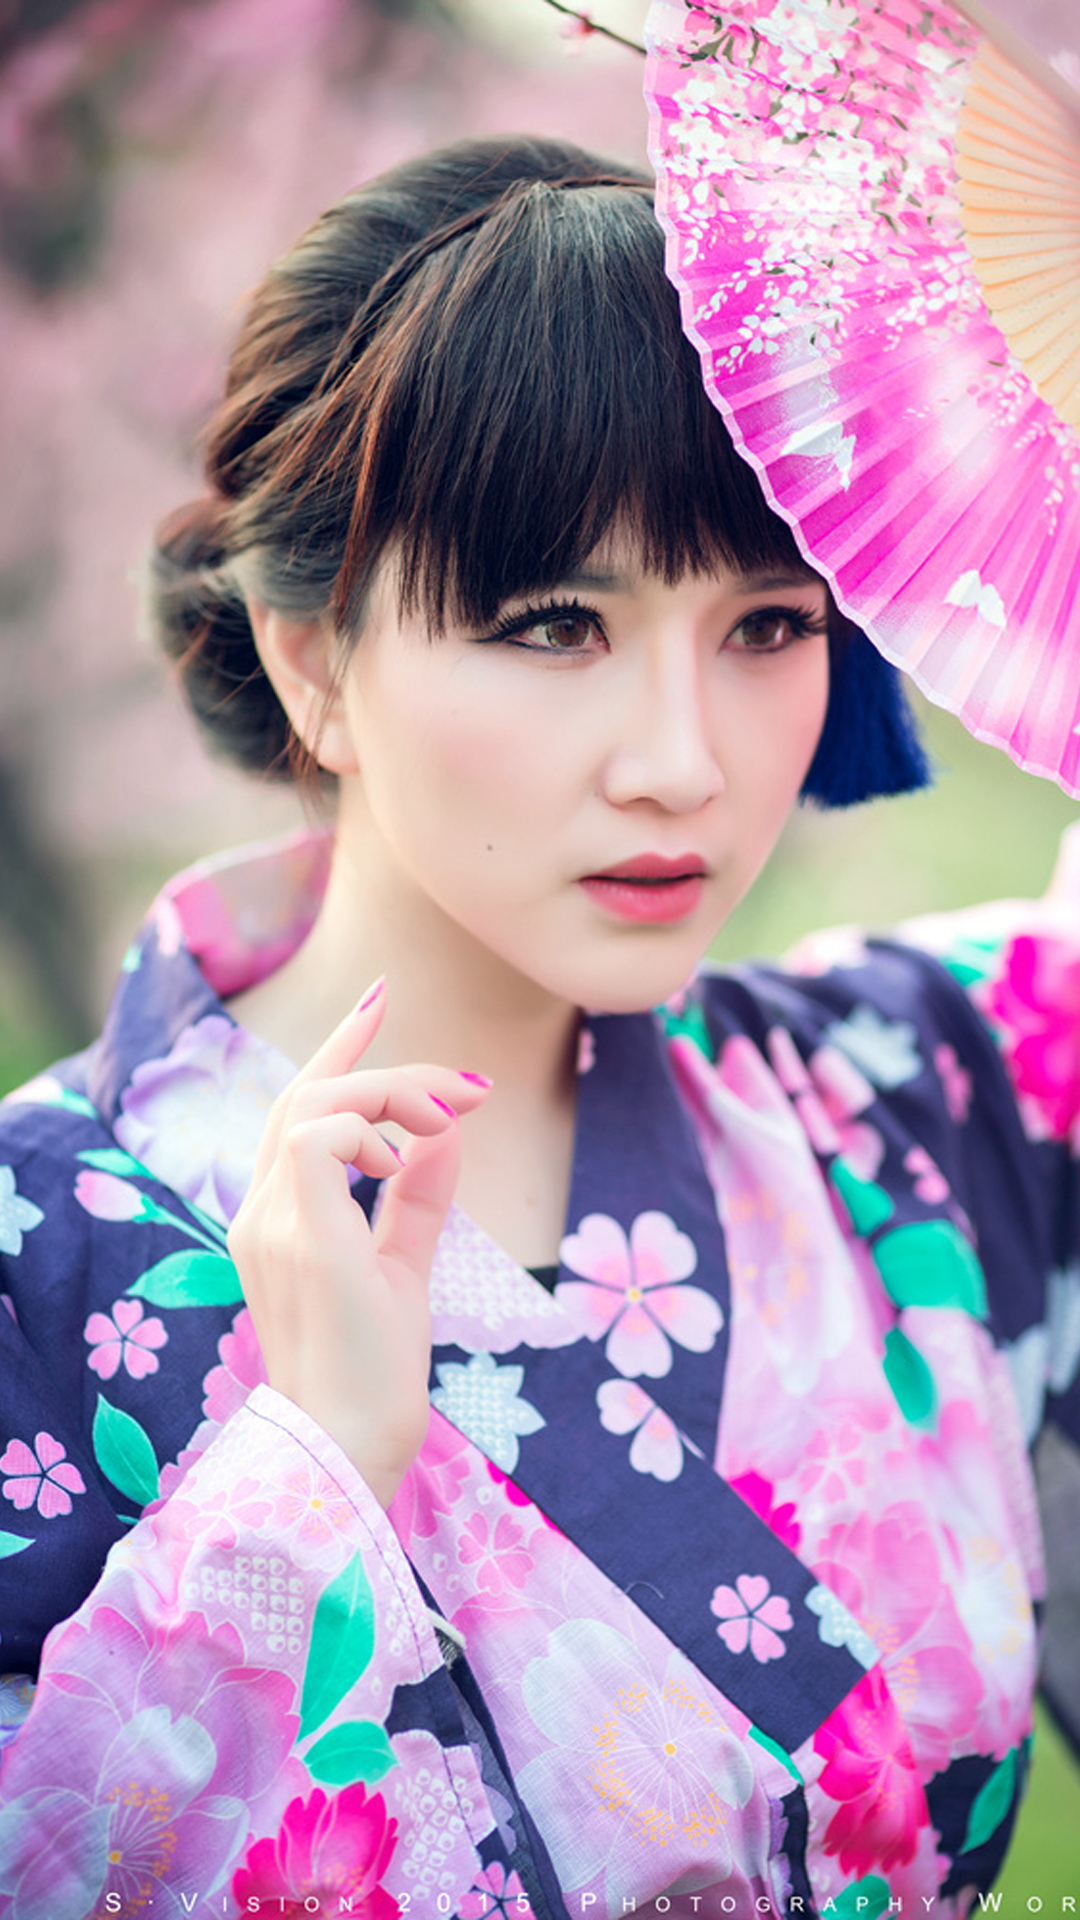 Cosplay Japanese culture Android wallpaper